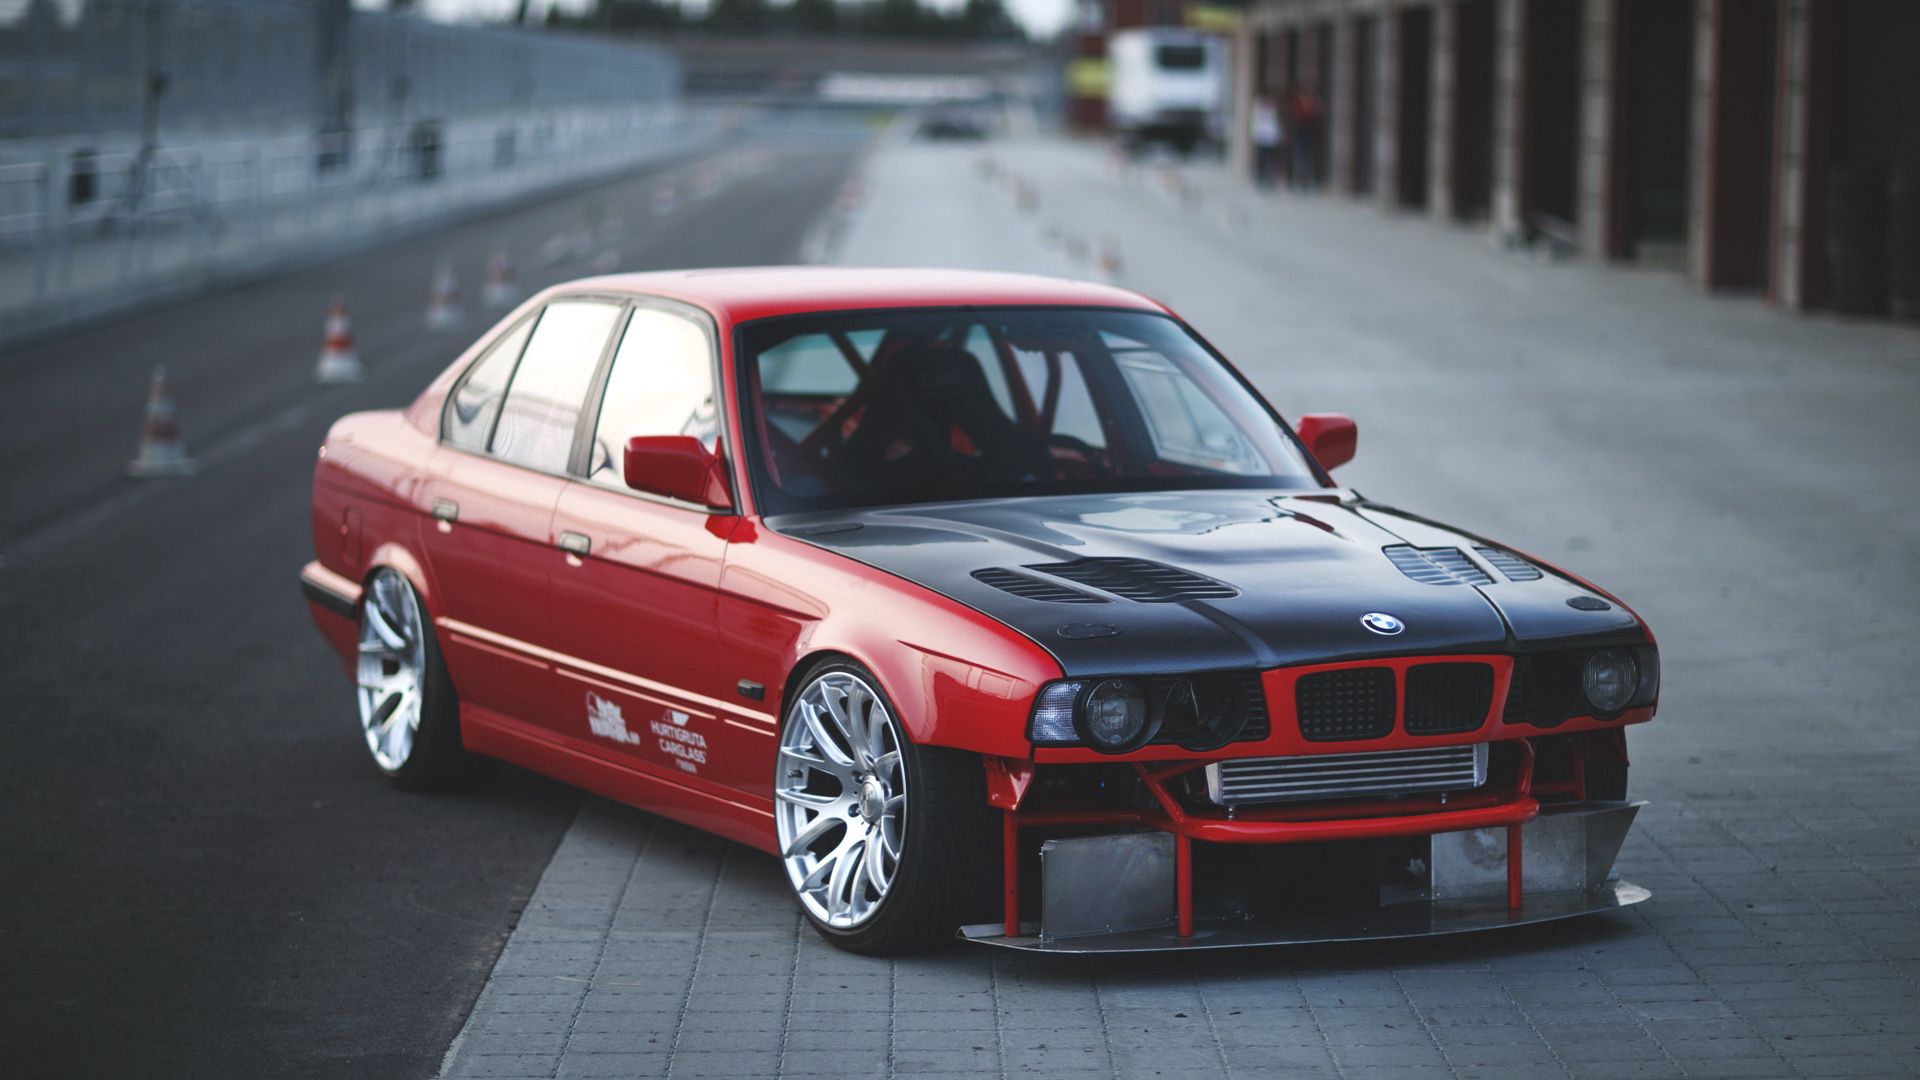 128500 download wallpaper side view, cars, auto, sports car, sports, bmw, red, e34 screensavers and pictures for free